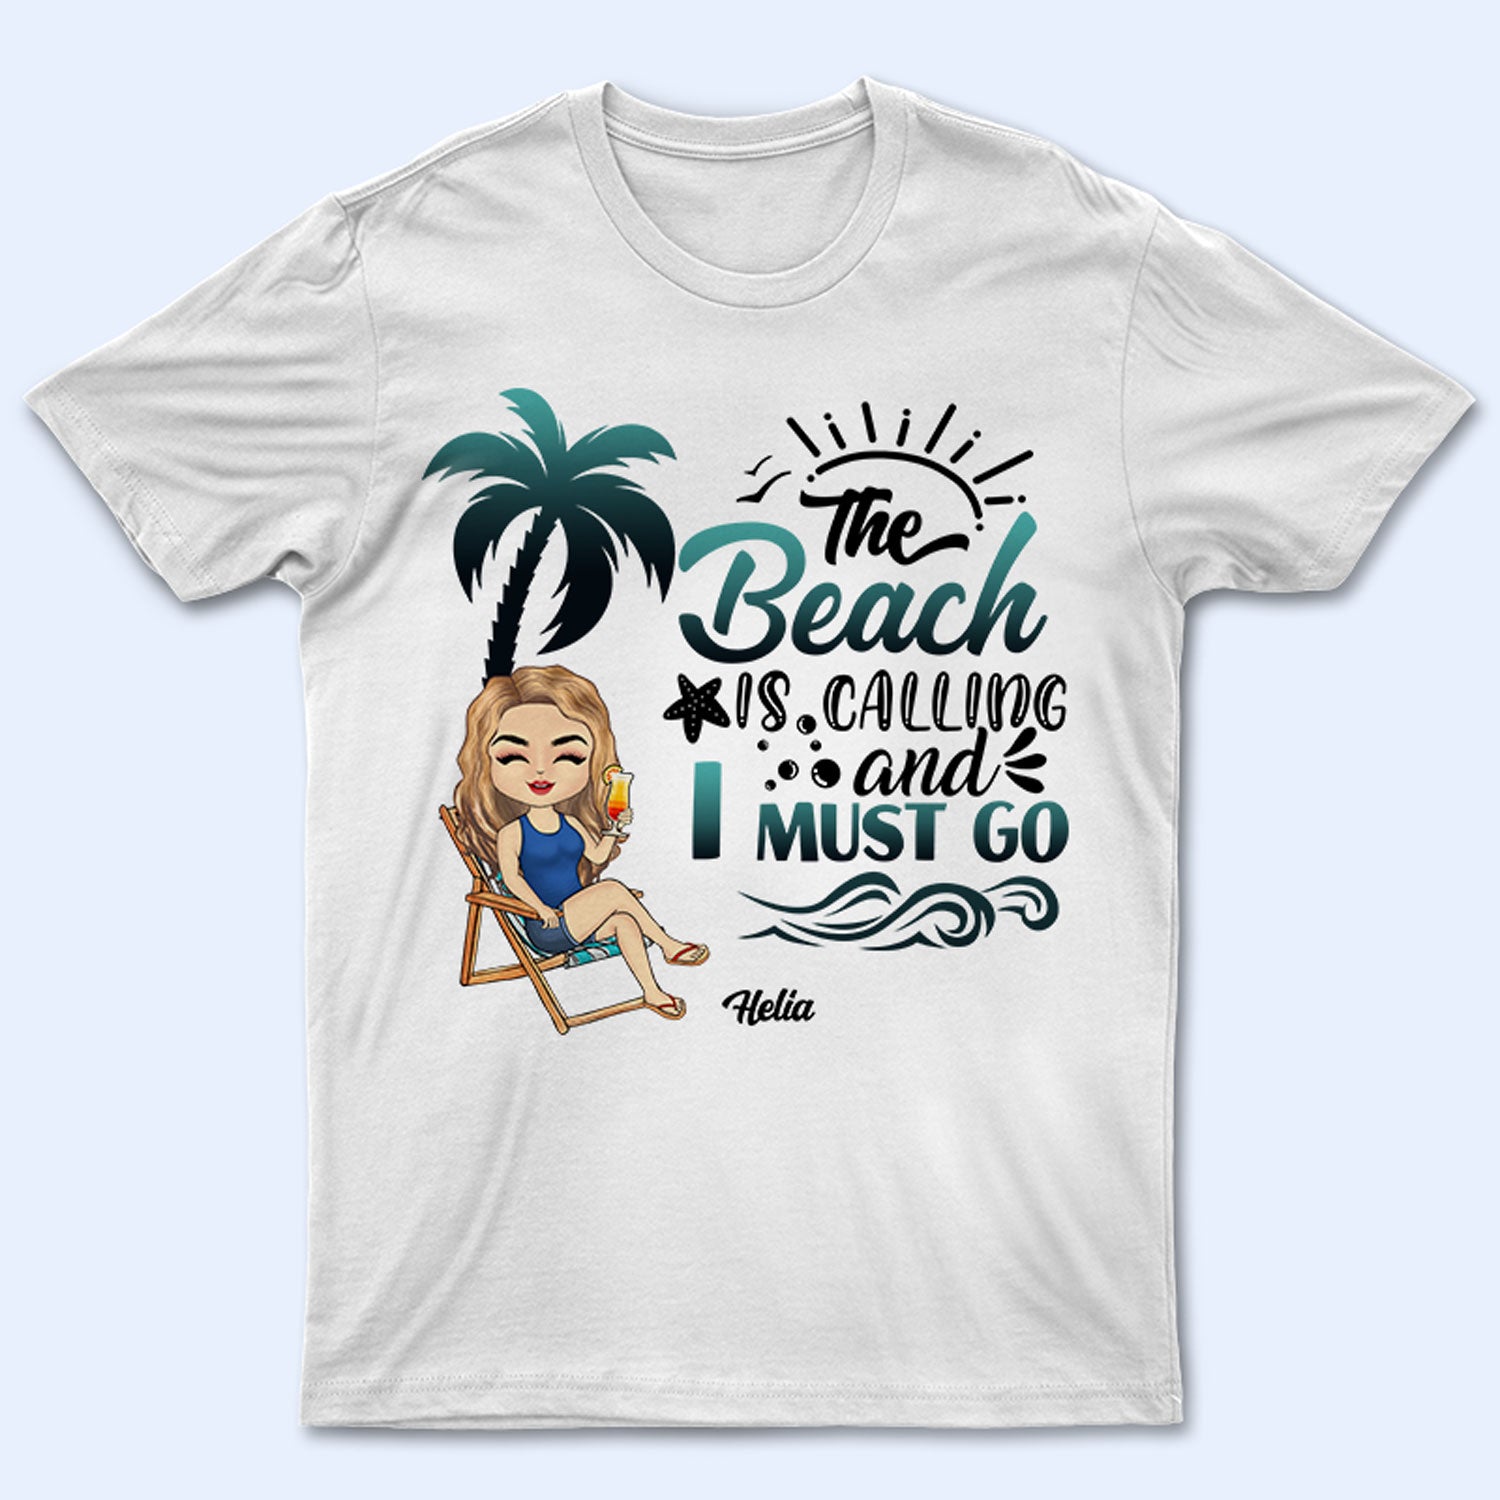 The Beach Is Calling - Birthday, Summer Gift For Him, Her, Yourself, Girlfriend, Boyfriend, BFF Best Friends, Traveling Lovers - Personalized Custom T Shirt